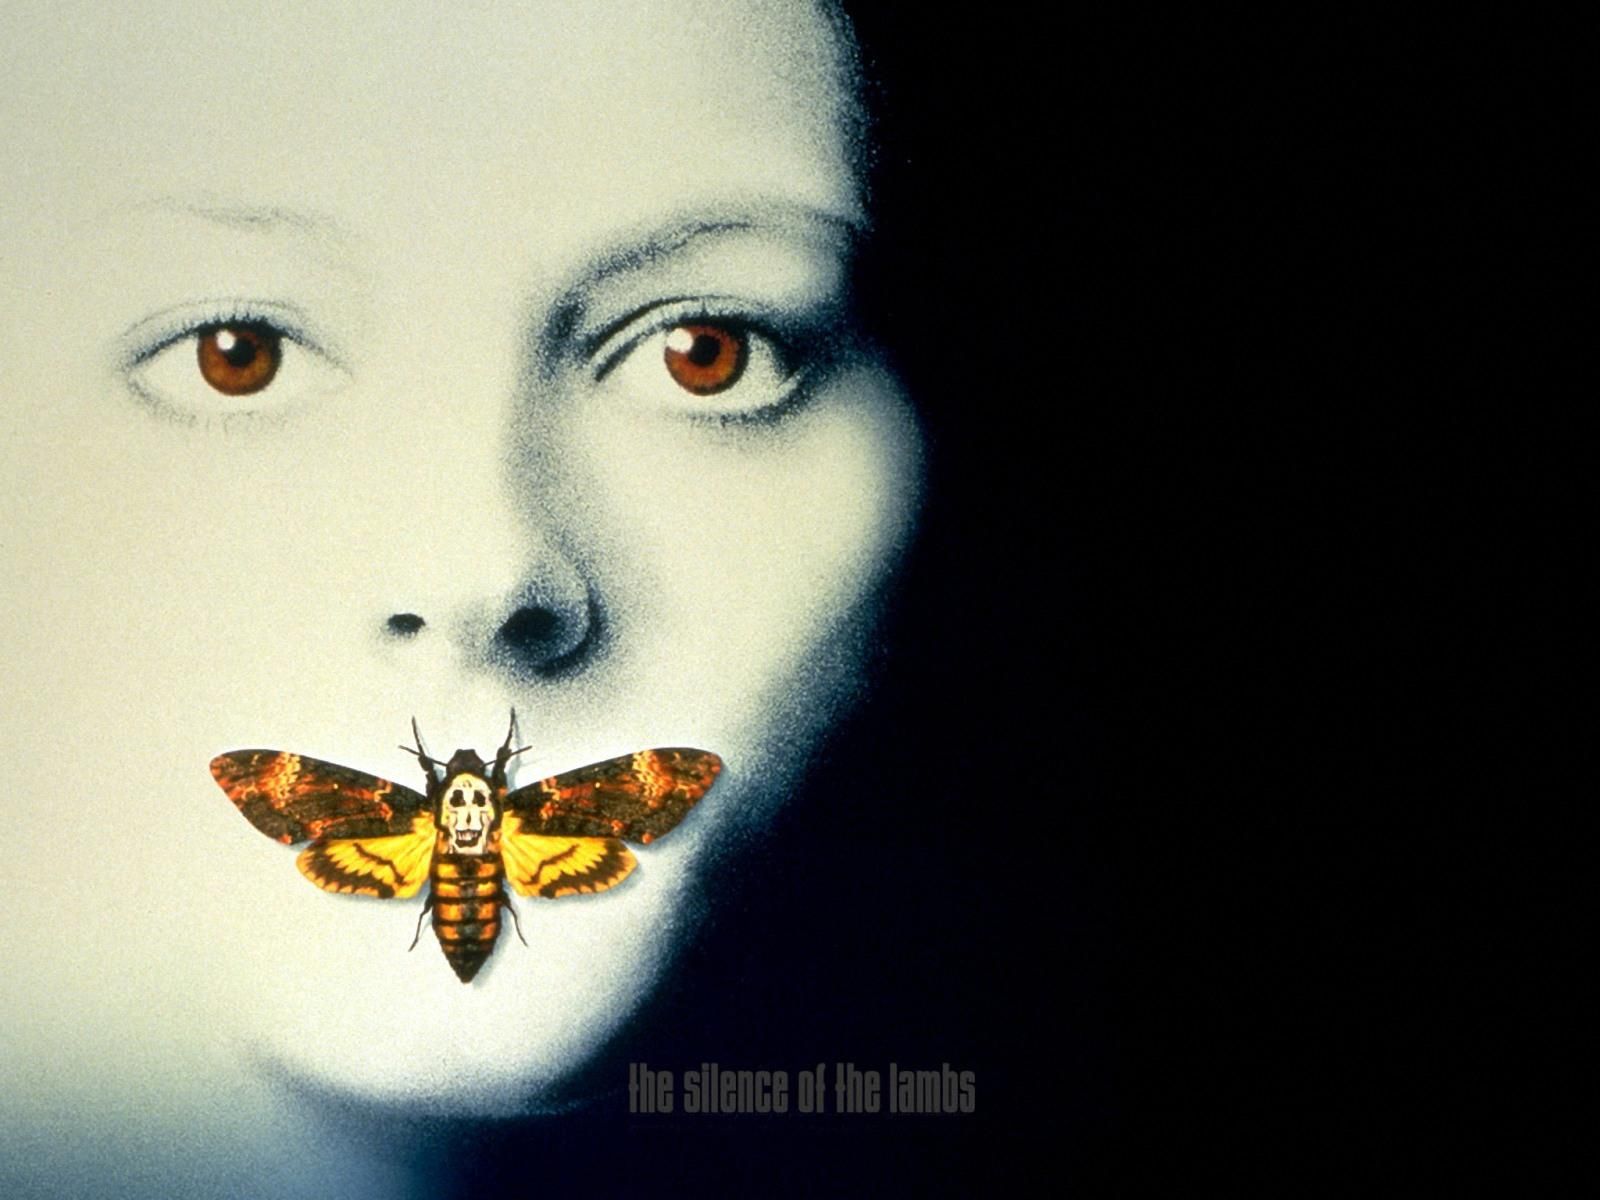 Silence of the lambs Wallpapers - Free silence of the lambs